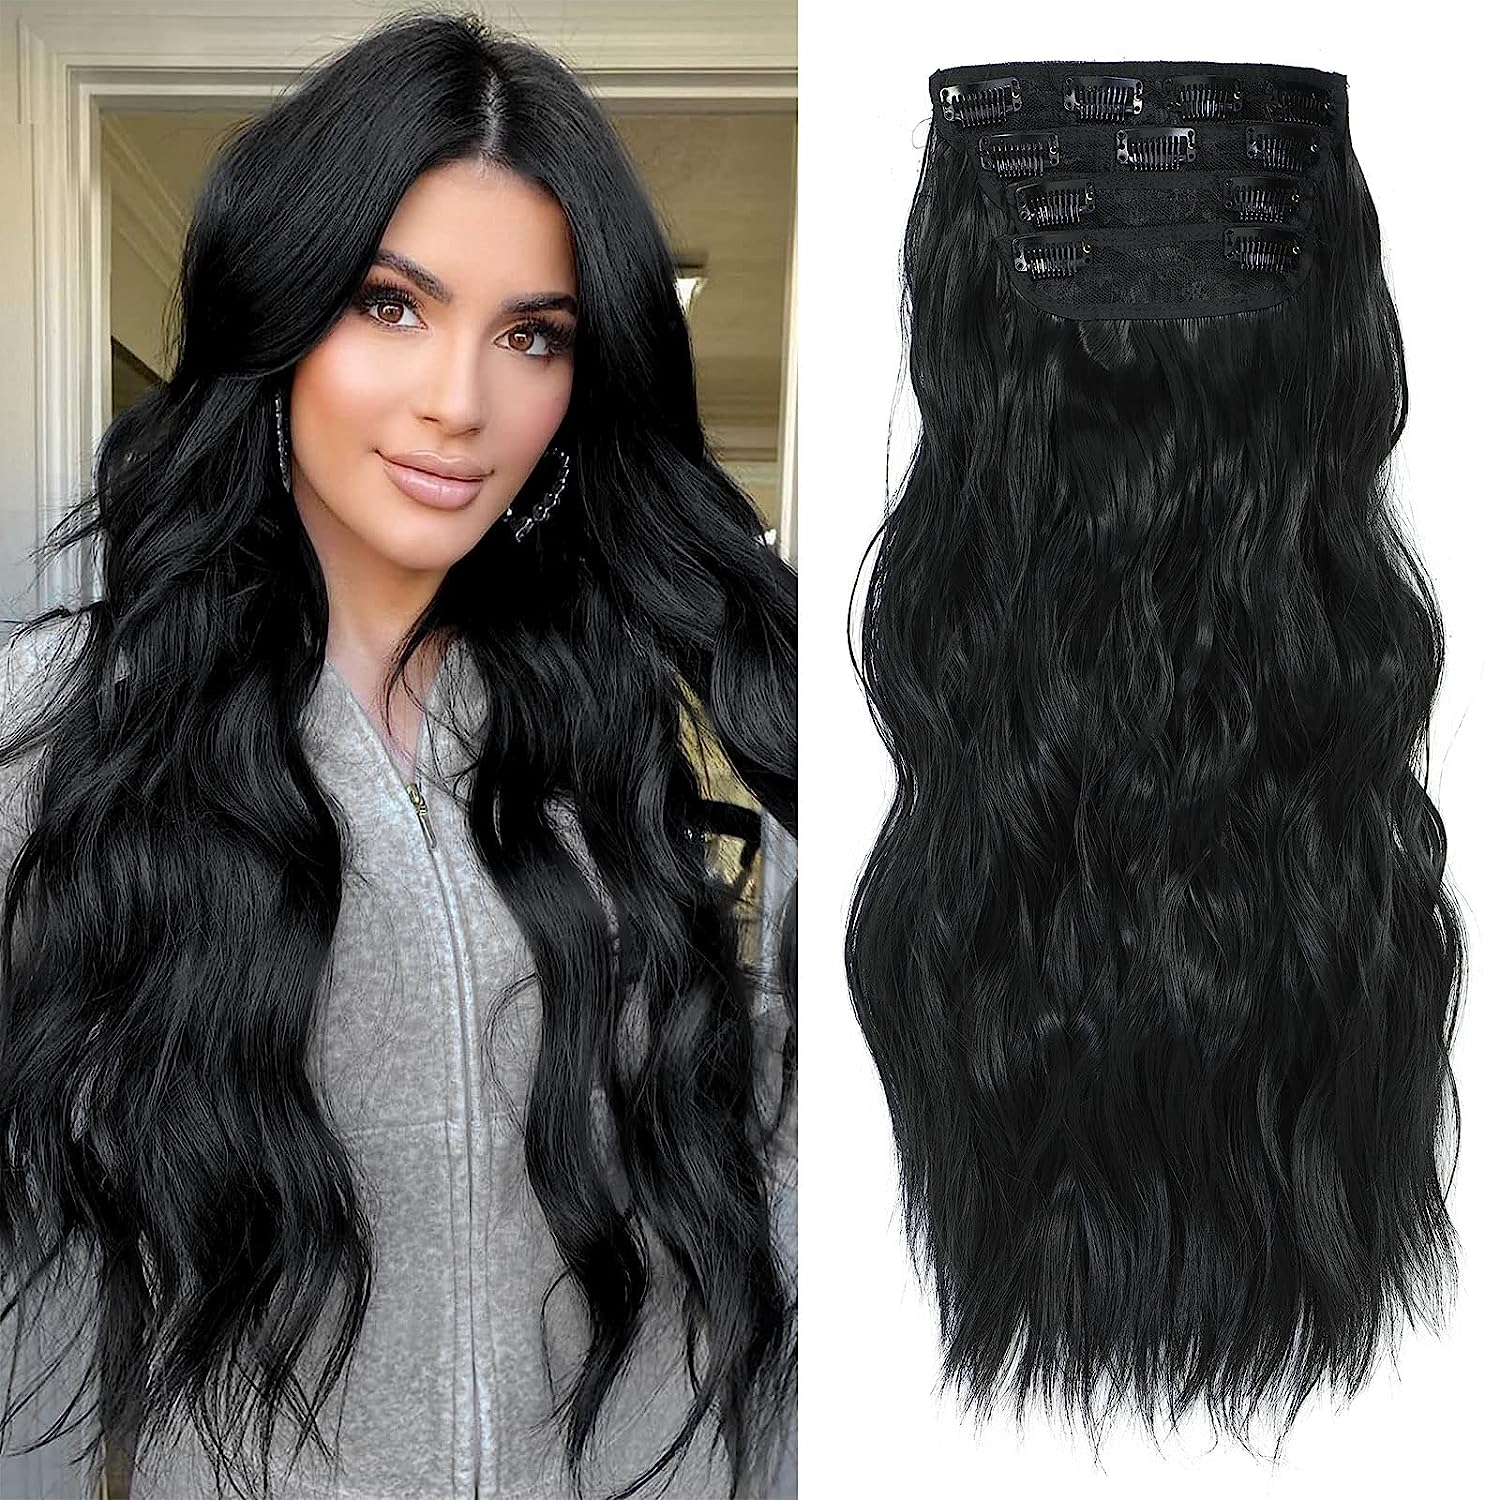 Clip in Hair Extensions 20 Inch Long Wavy Curly Black [...]